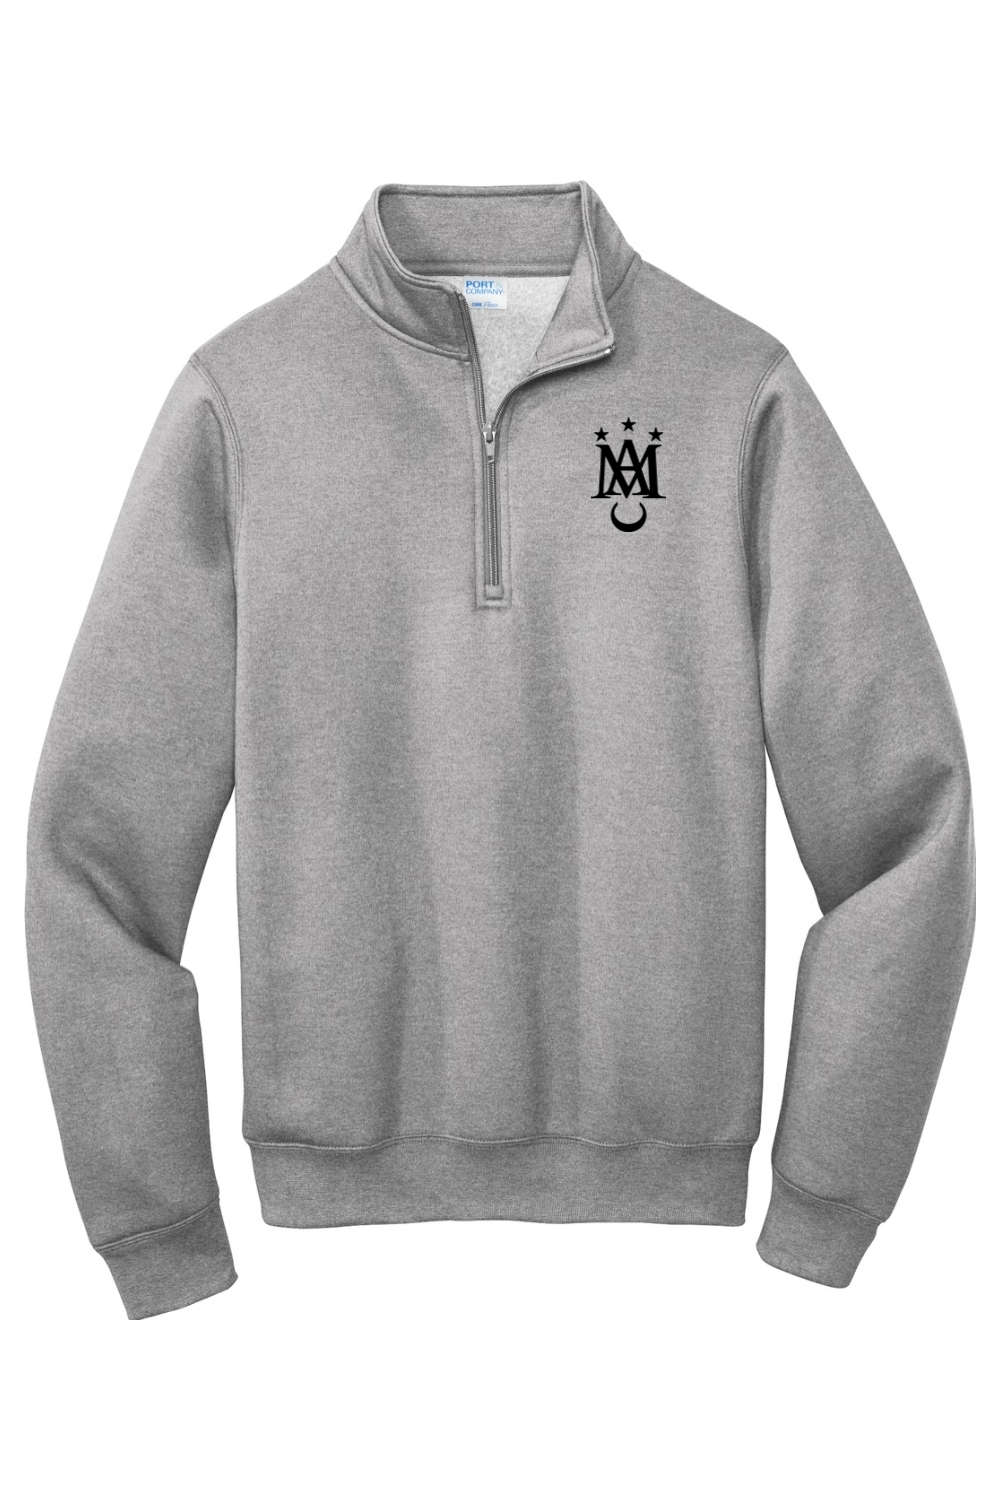 Our Lady of the Visitation Logo Quarter Zip